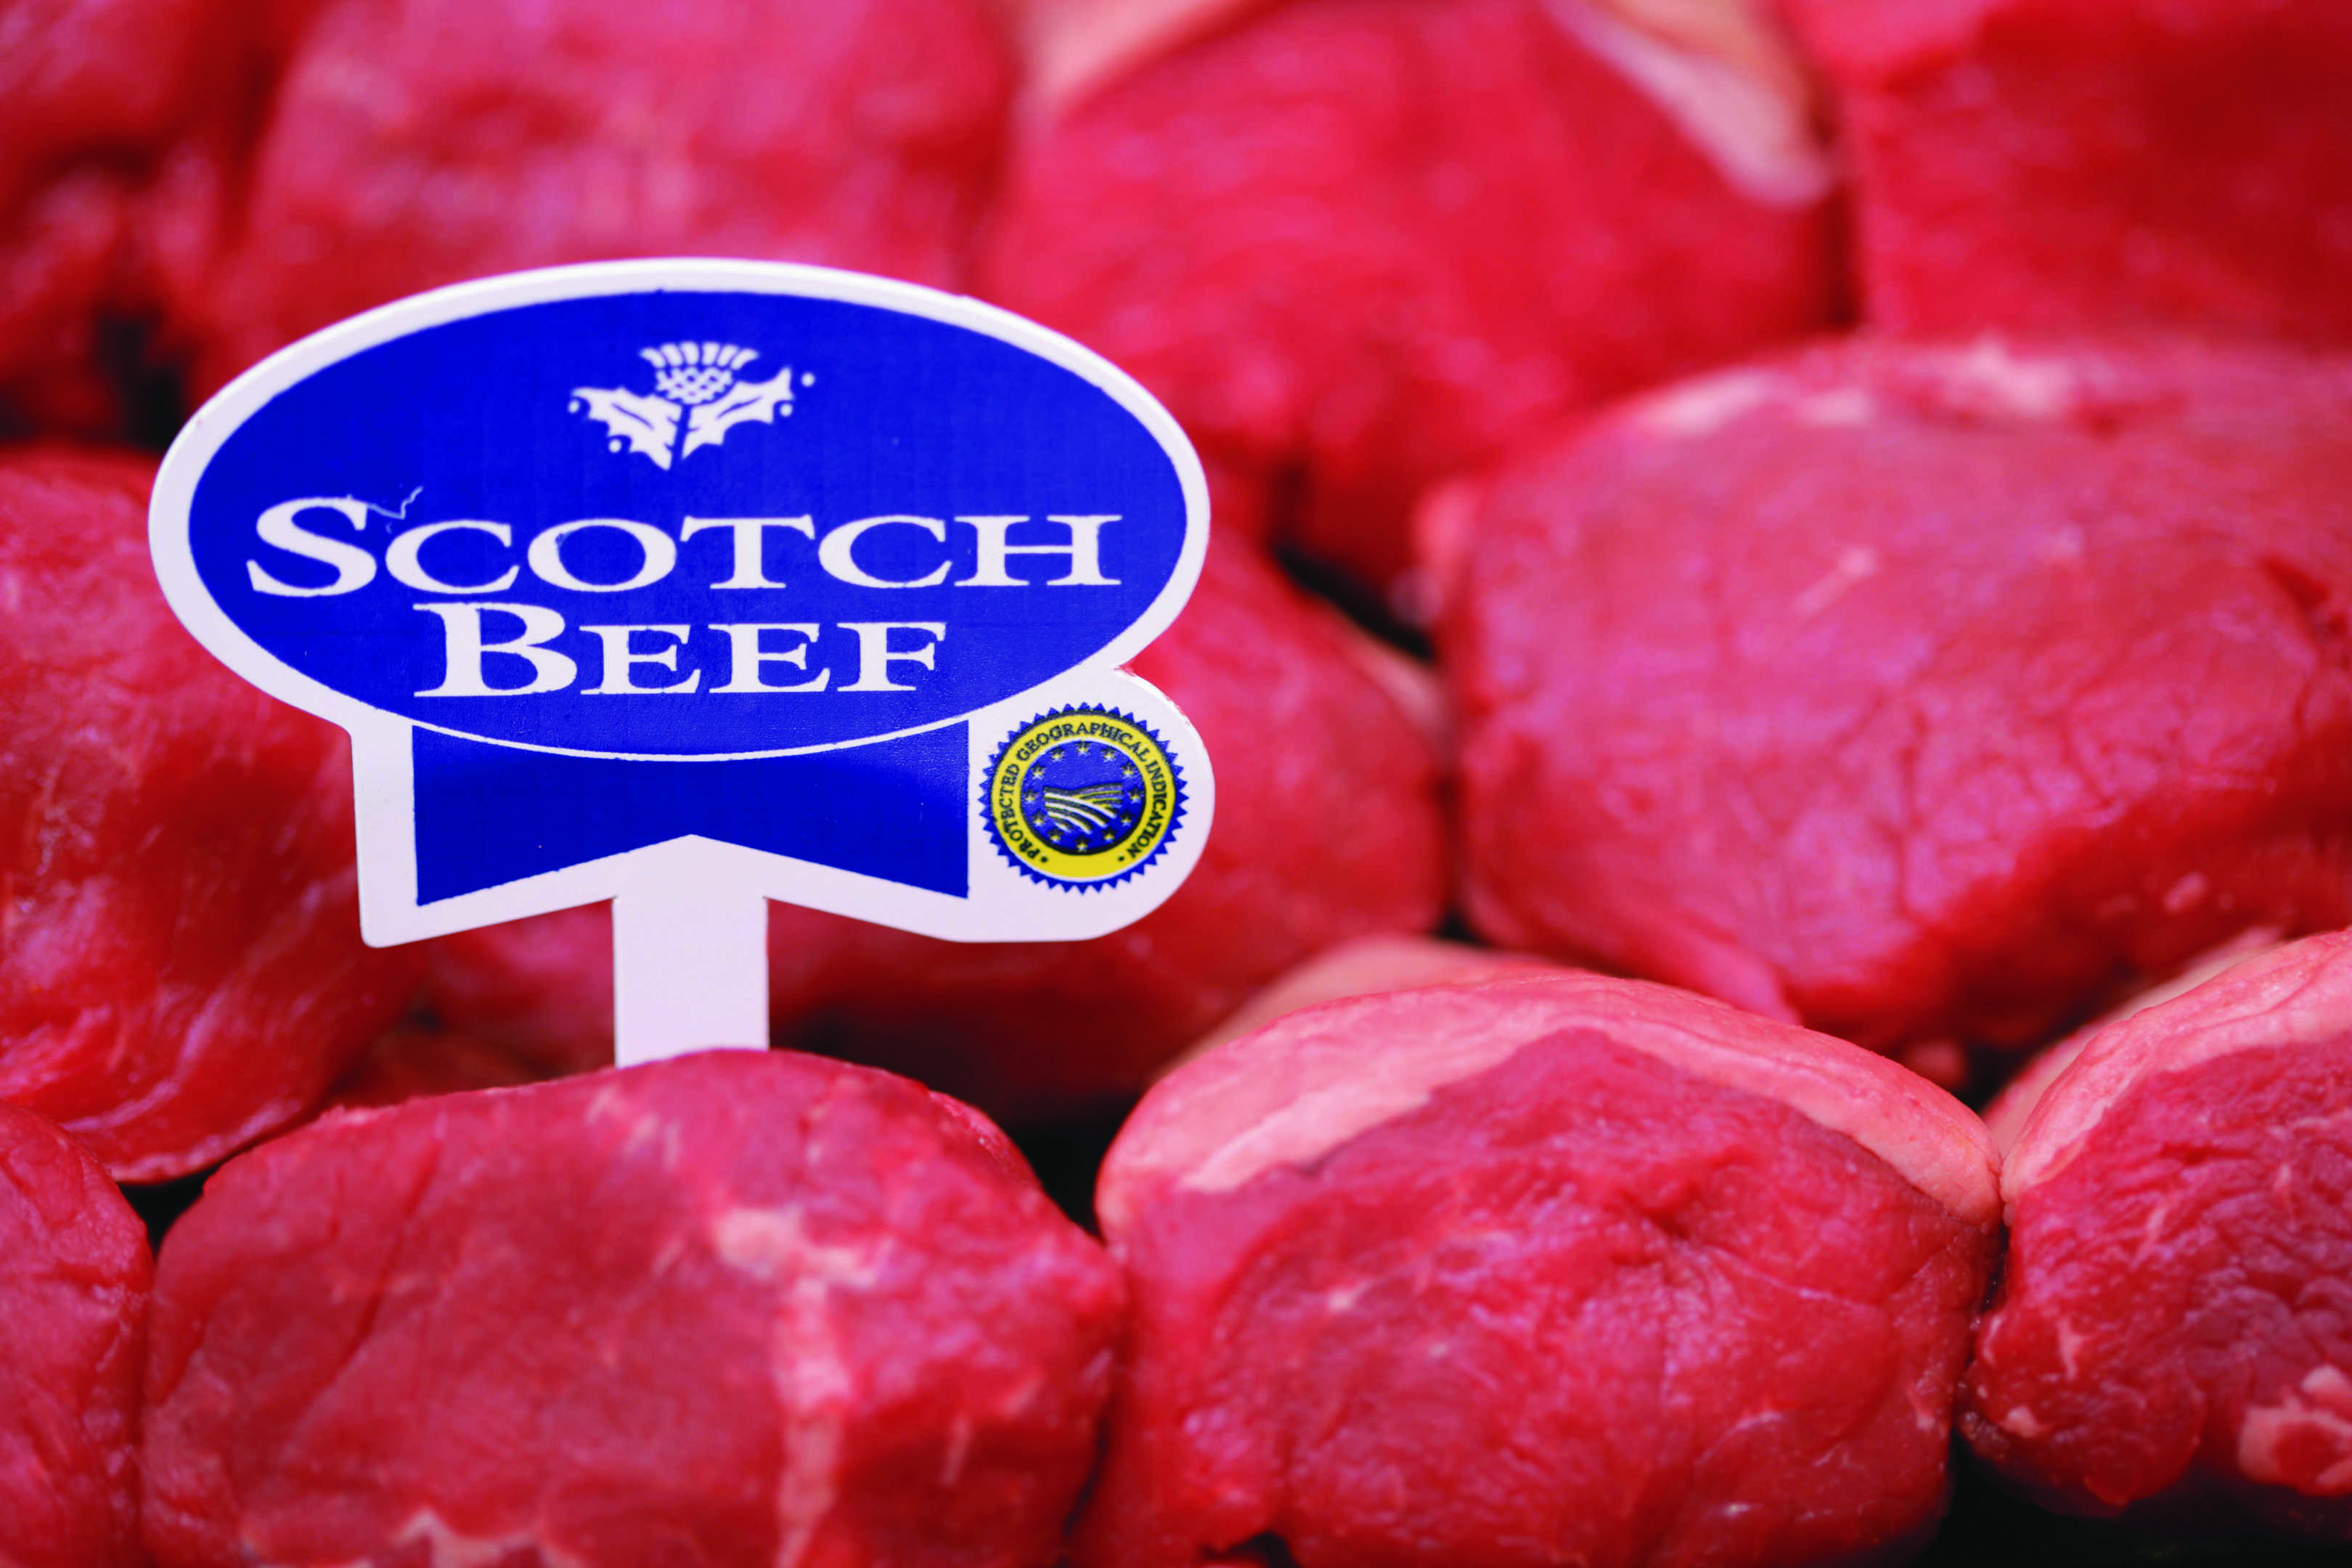 In 2016 there were reports of cheaper and inferior foreign beef entering the country and being illegally rebranded as Scotch beef.